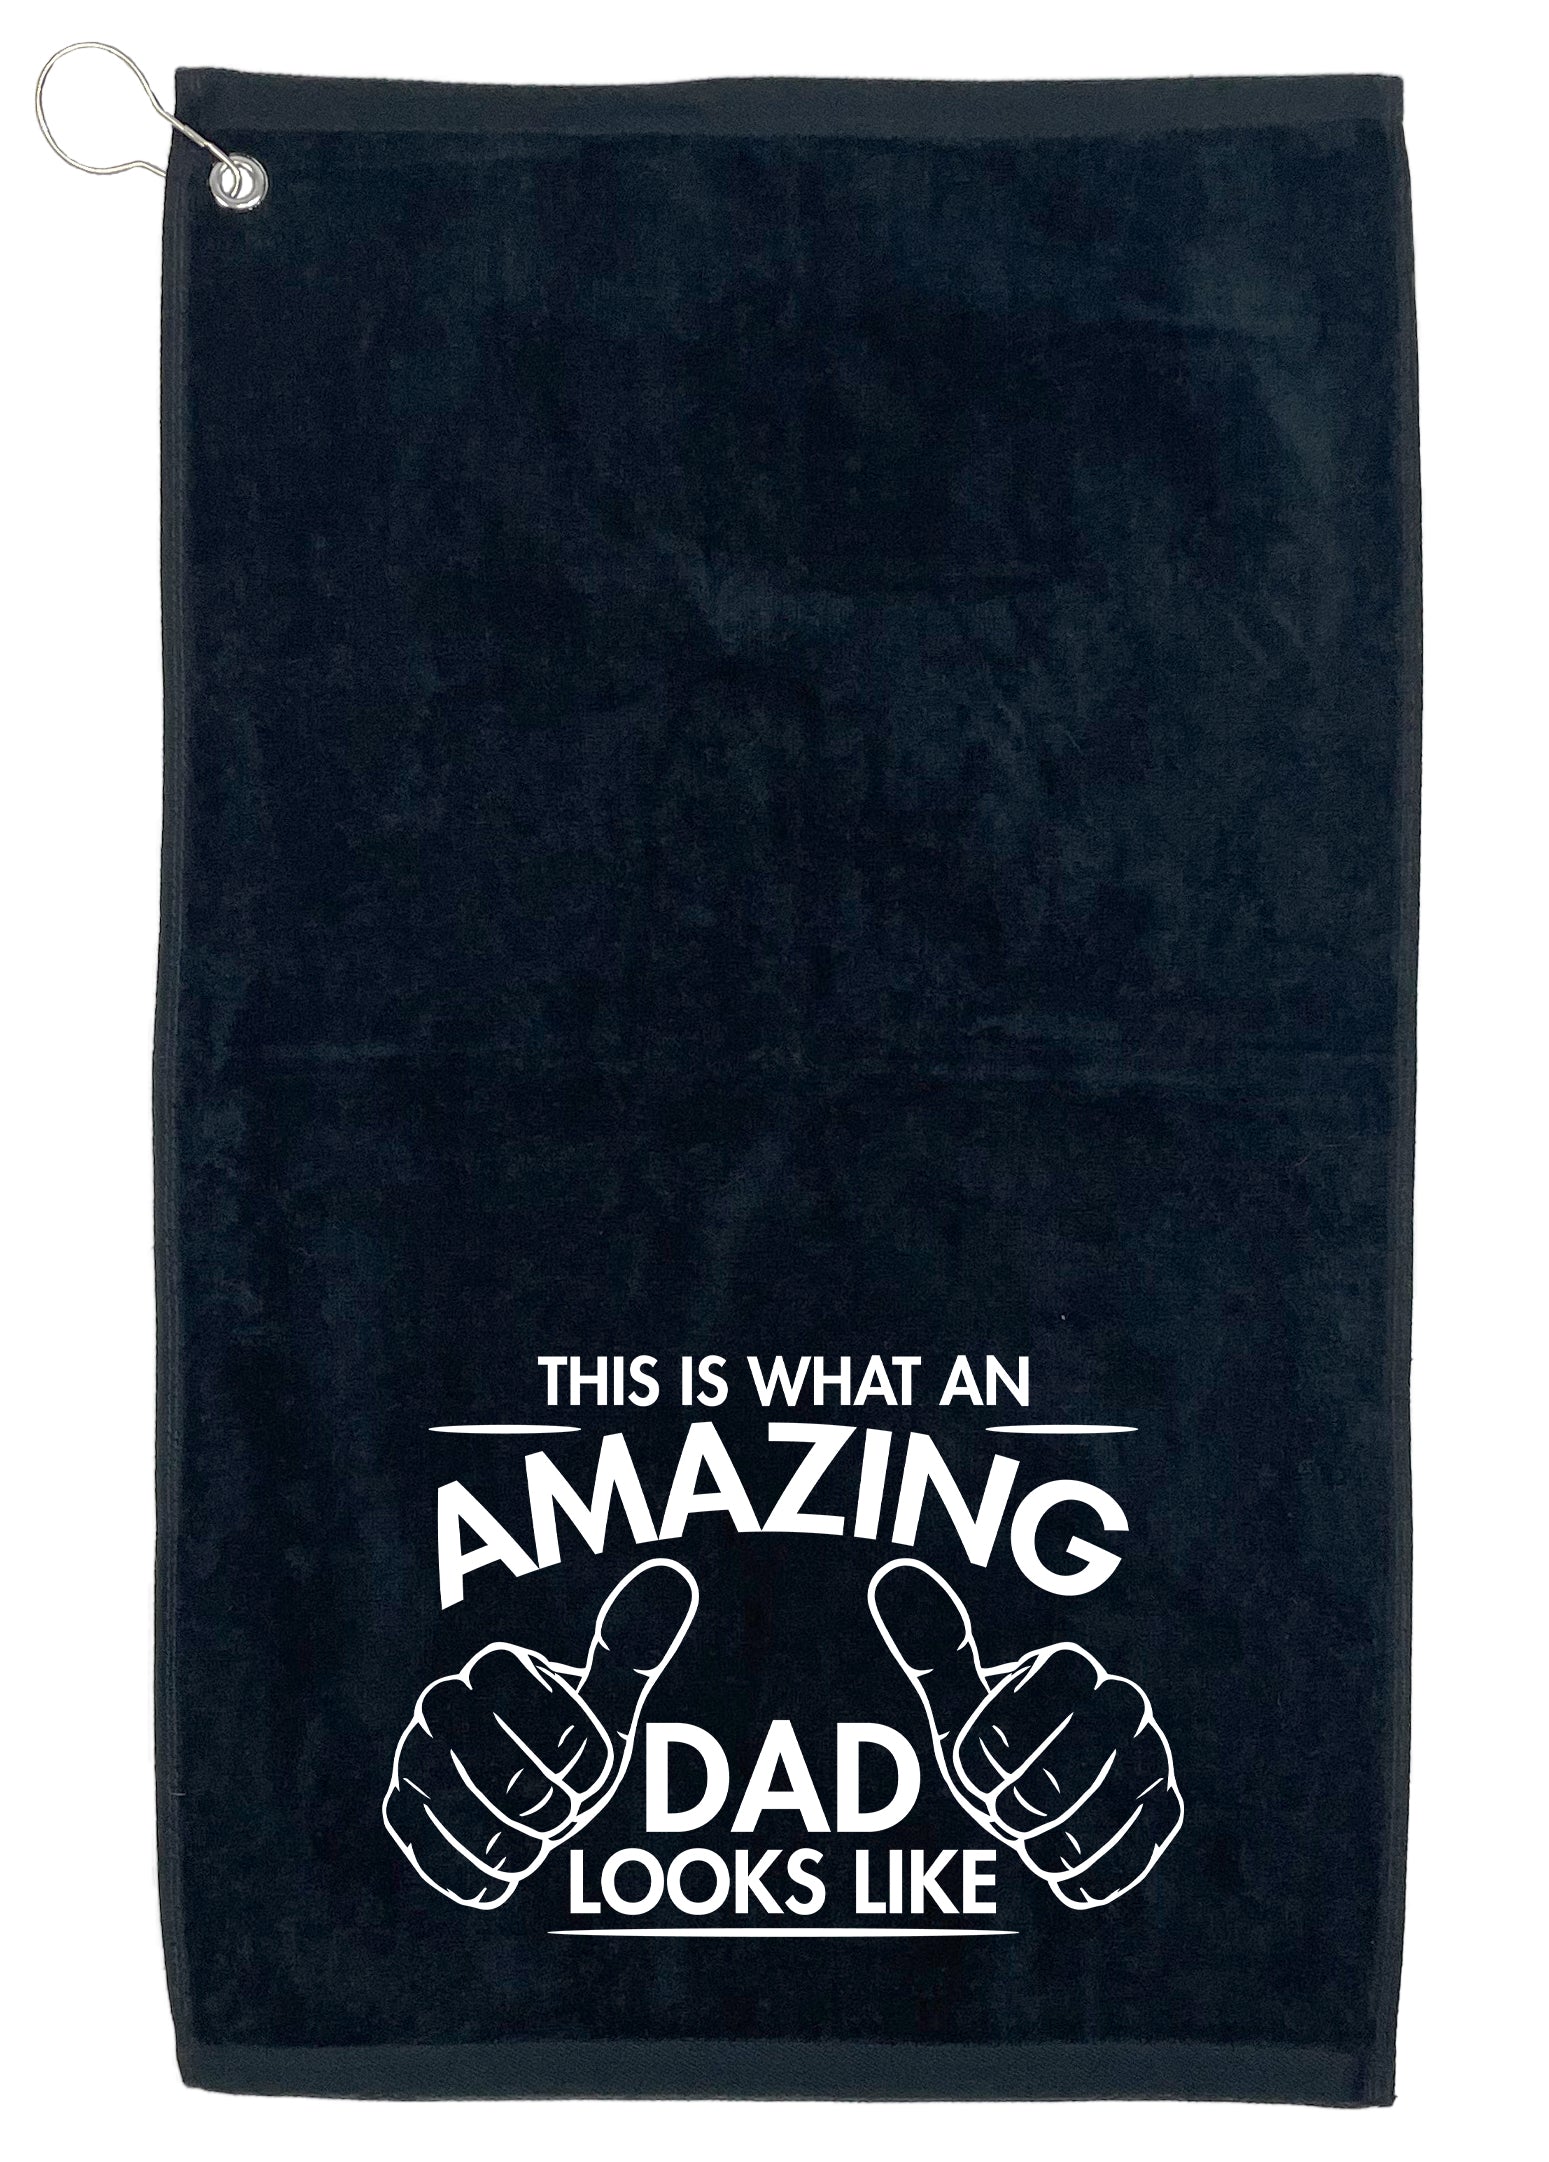 This Is What An Amzaing Dad Looks Like, Golf Towel - Funny T Shirts & Graphic Tees